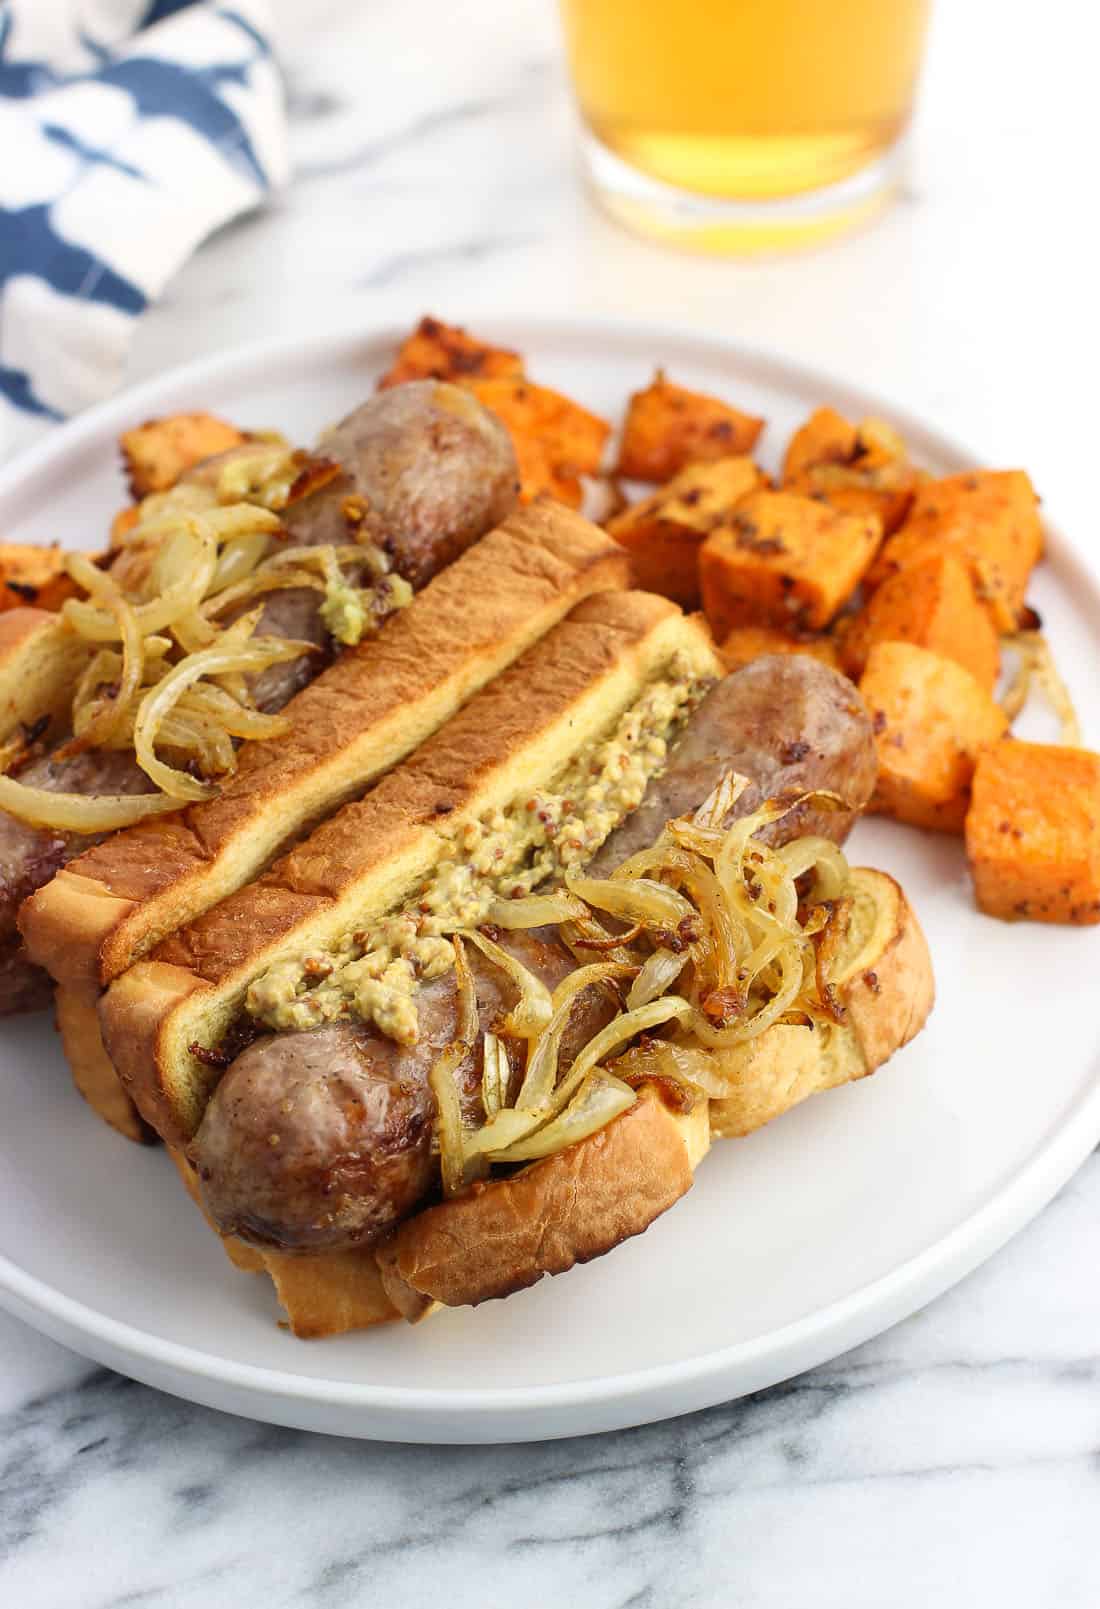 Two bratwursts in buns with the fixing on a plate with roasted sweet potatoes.